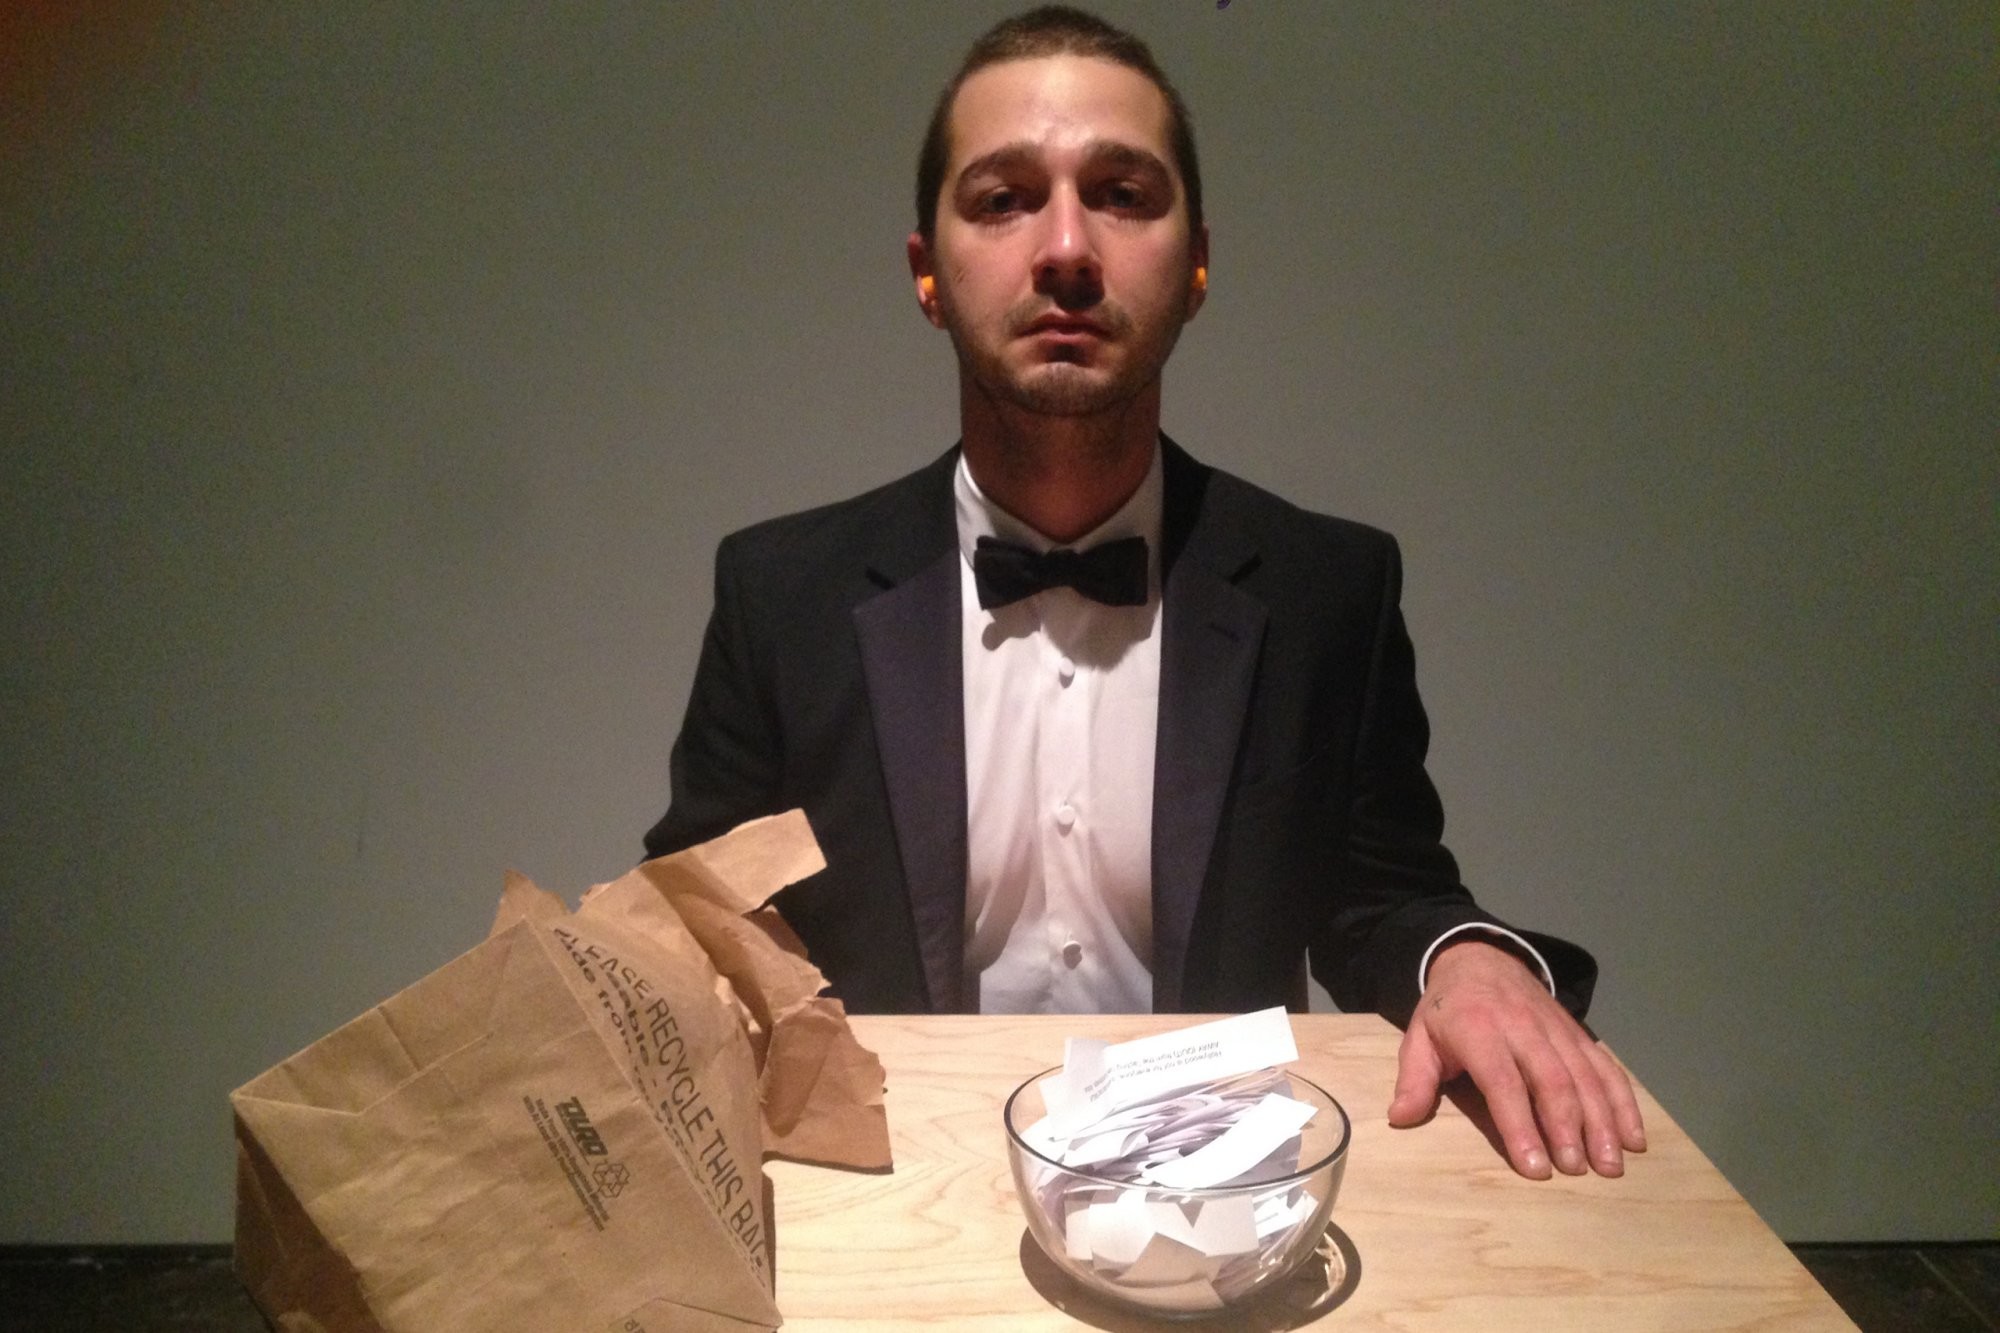 I Watched Shia LaBeouf Cry at His Weird LA Art Project #IAMSORRY – The Daily